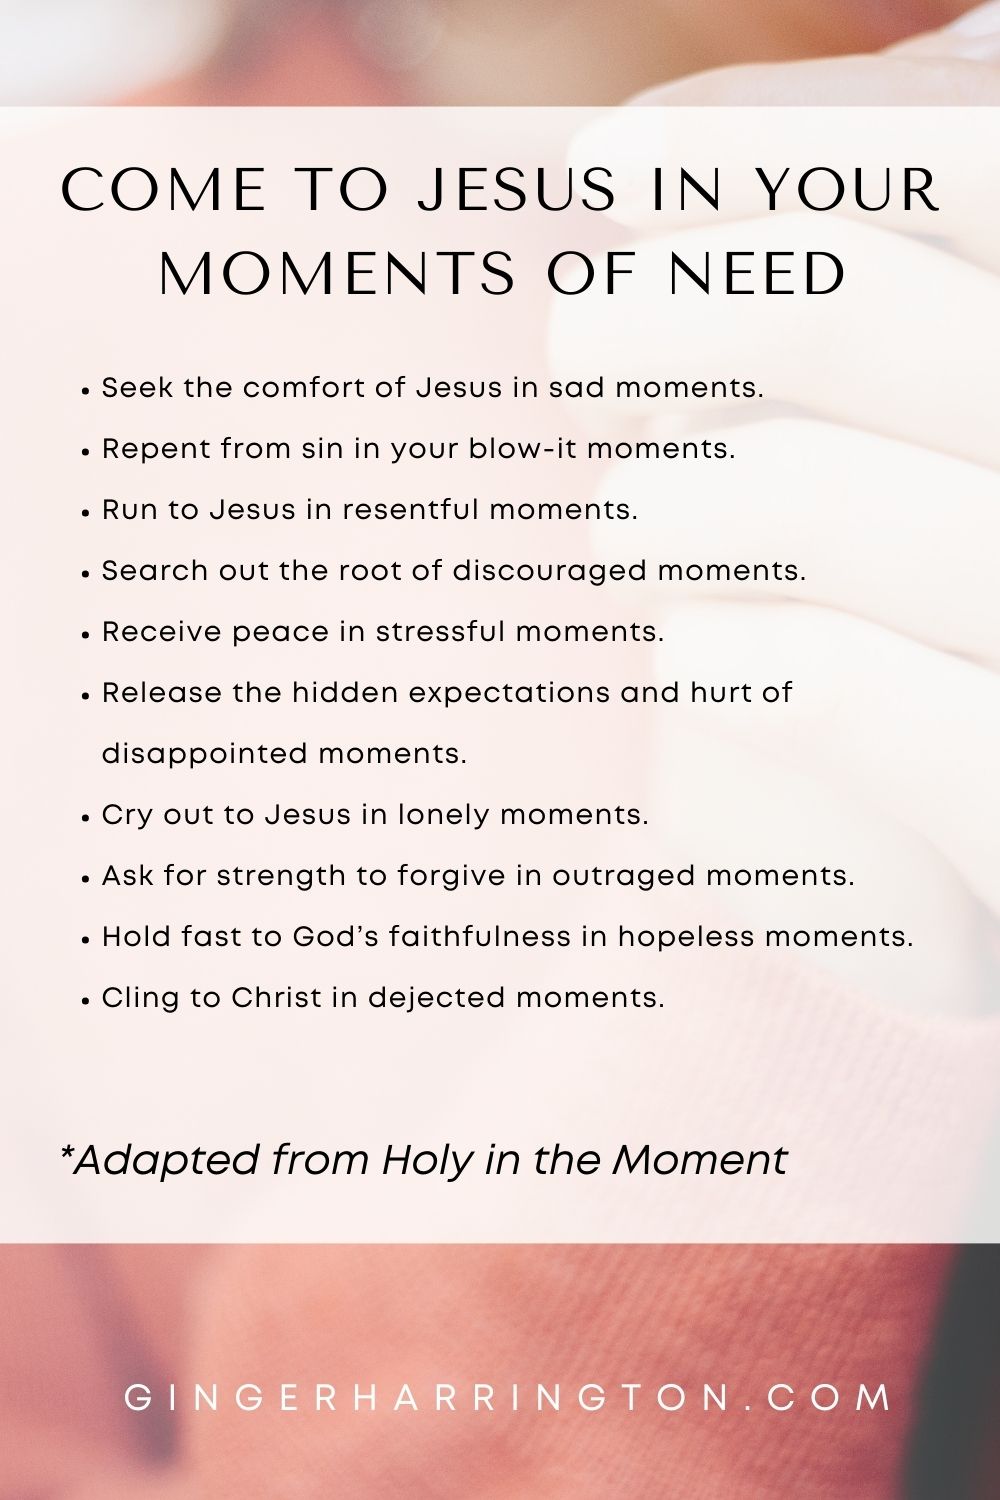 List of Moments to Come to Jesus in Prayer